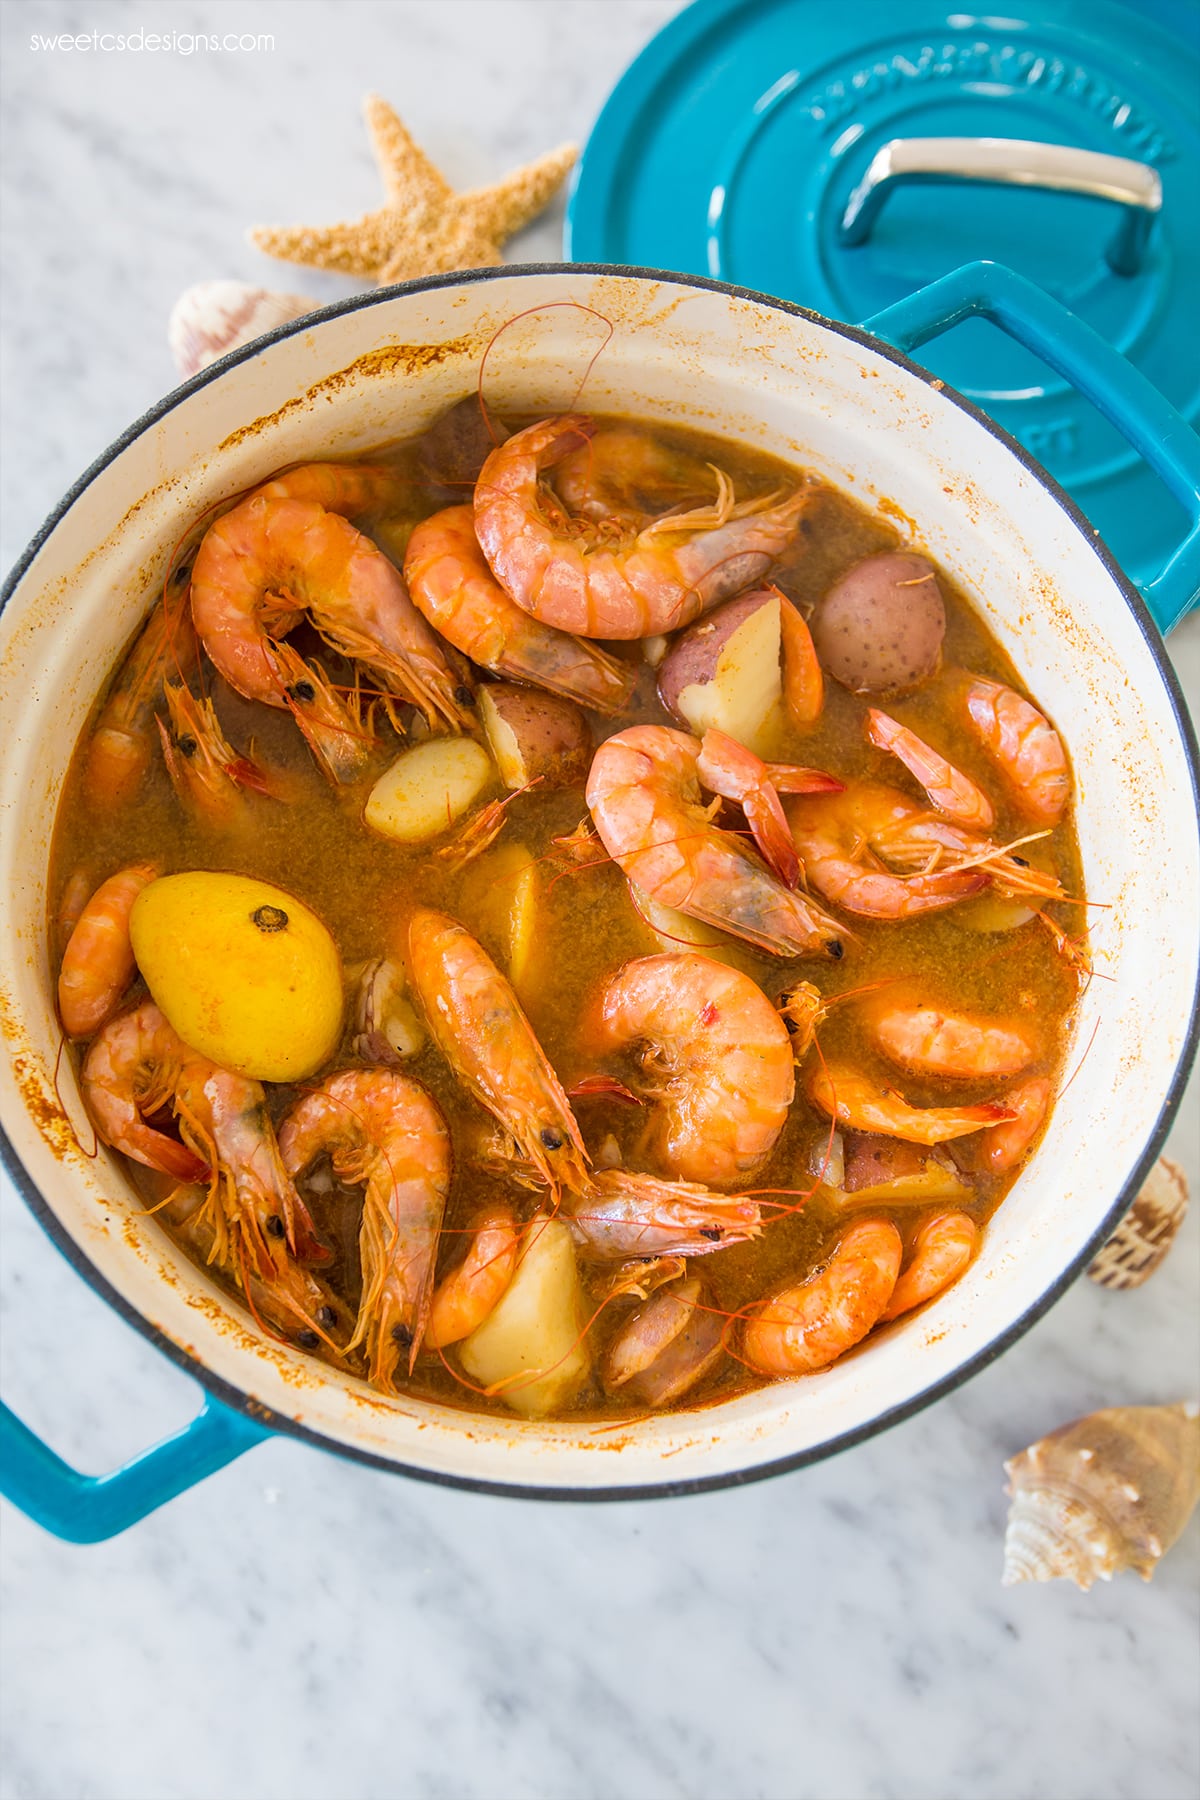 Shrimp Boil- yum! So easy and delicious.